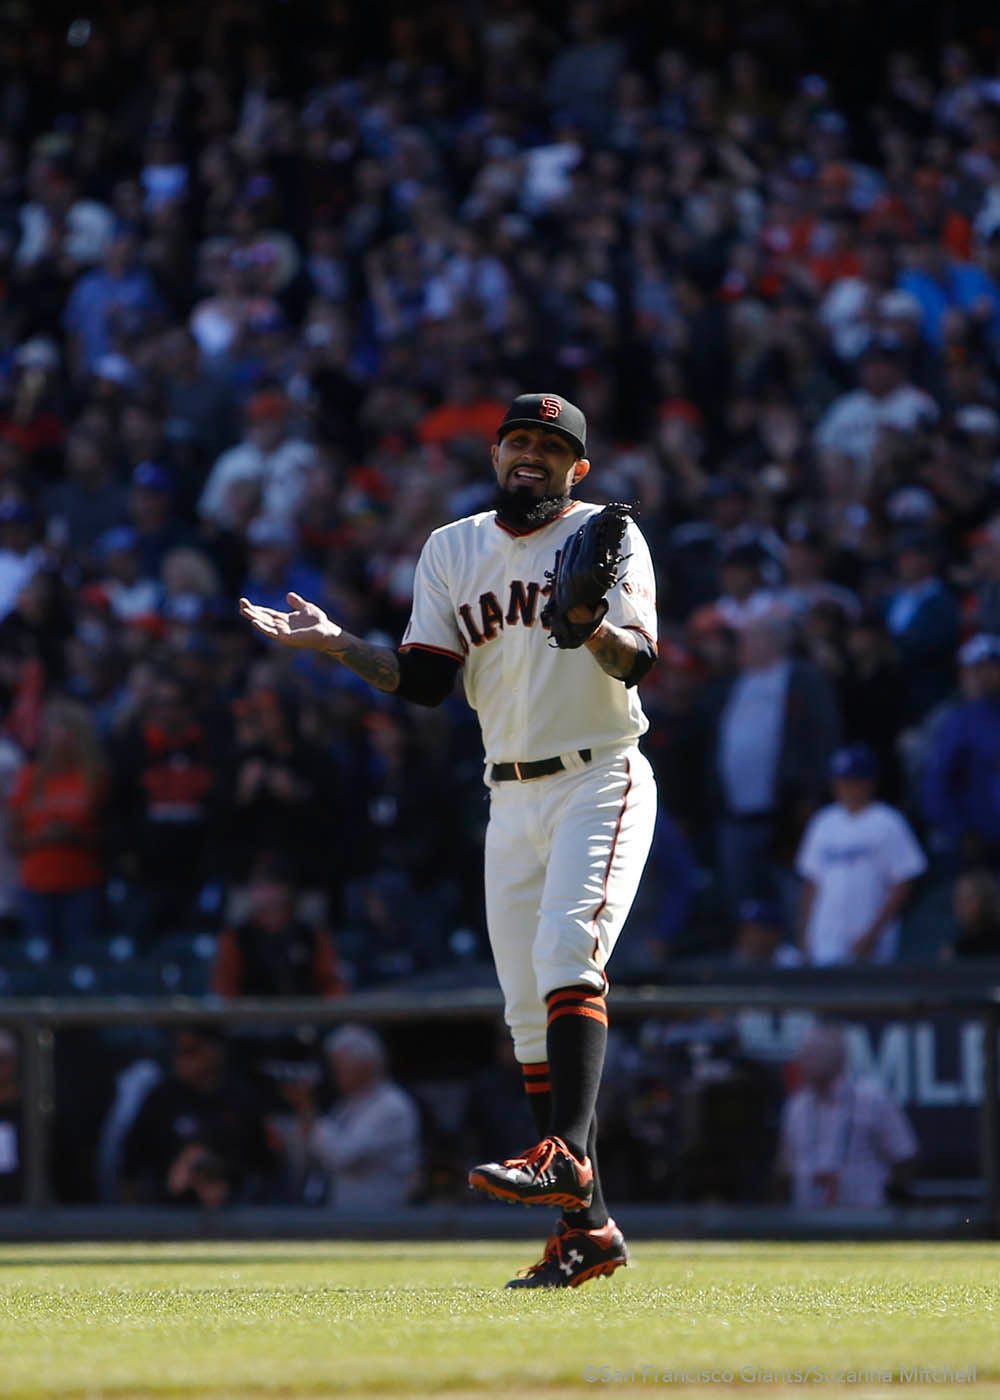 Sergio Romo celebrates after the final out of the ninth inning.